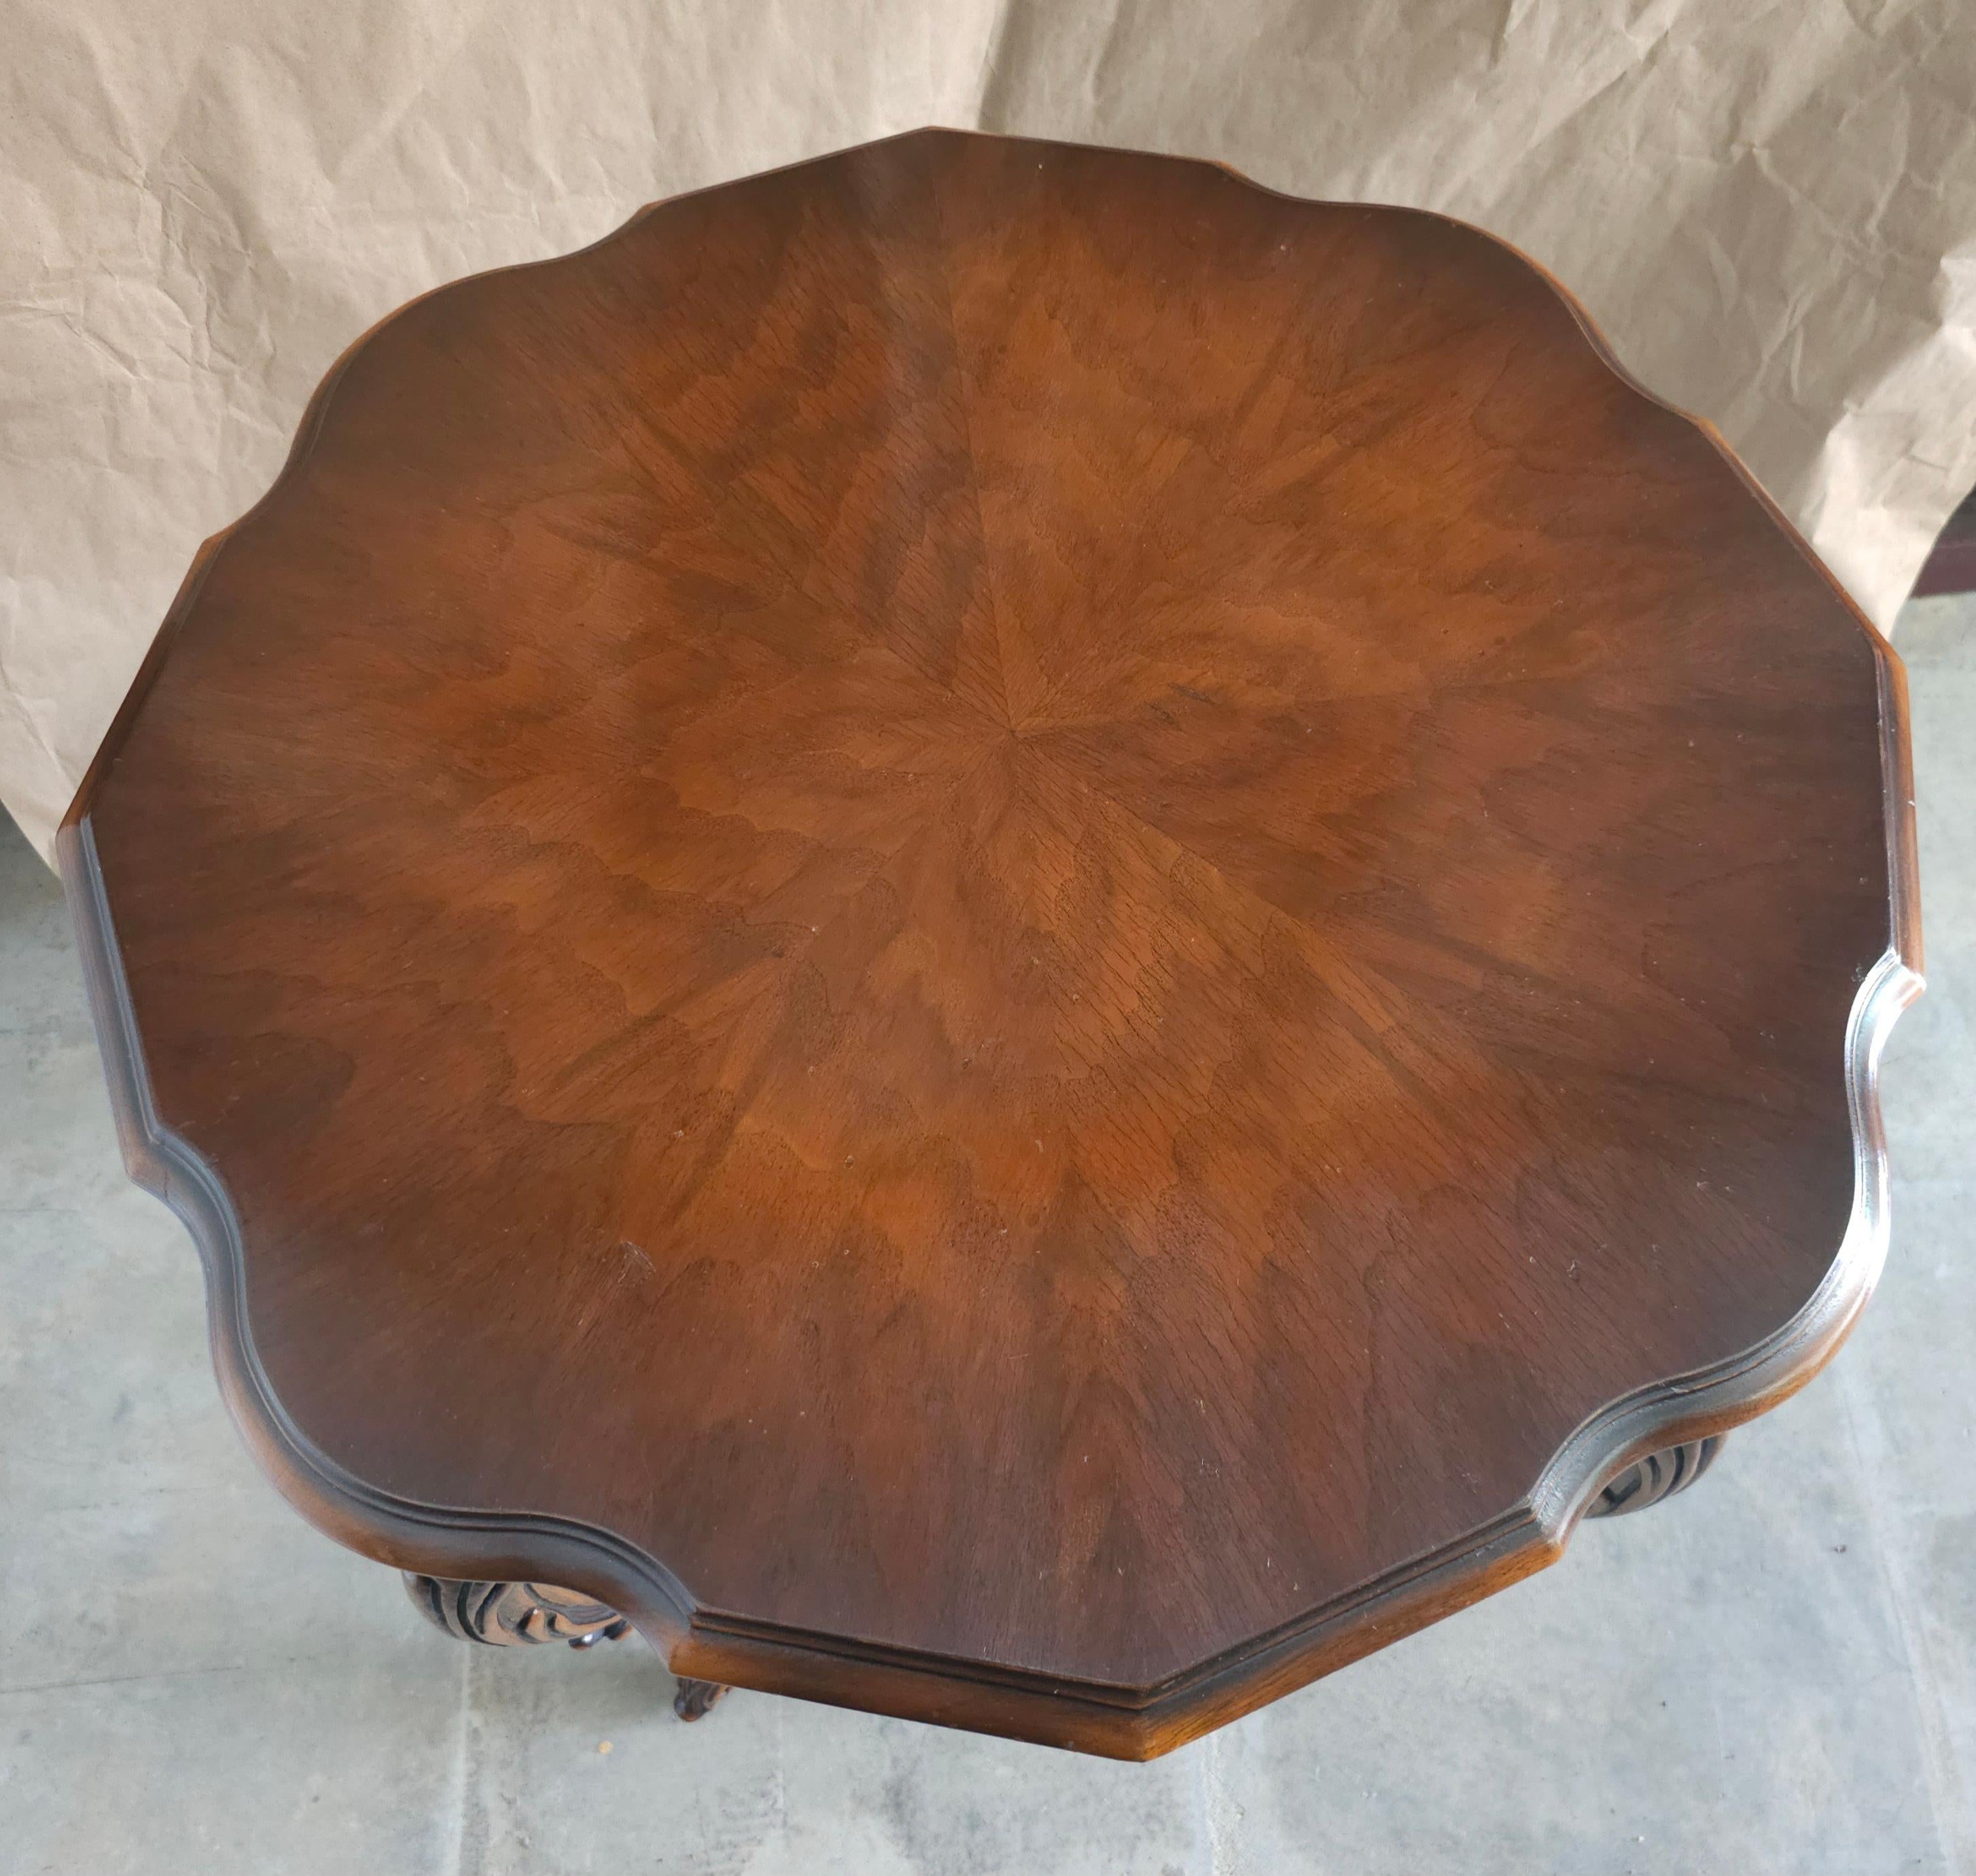 A 20th Century Louis XV Provincial Style Carved Walnut Gueridon Table. Solid wood carvings without composite material.
Measures 28